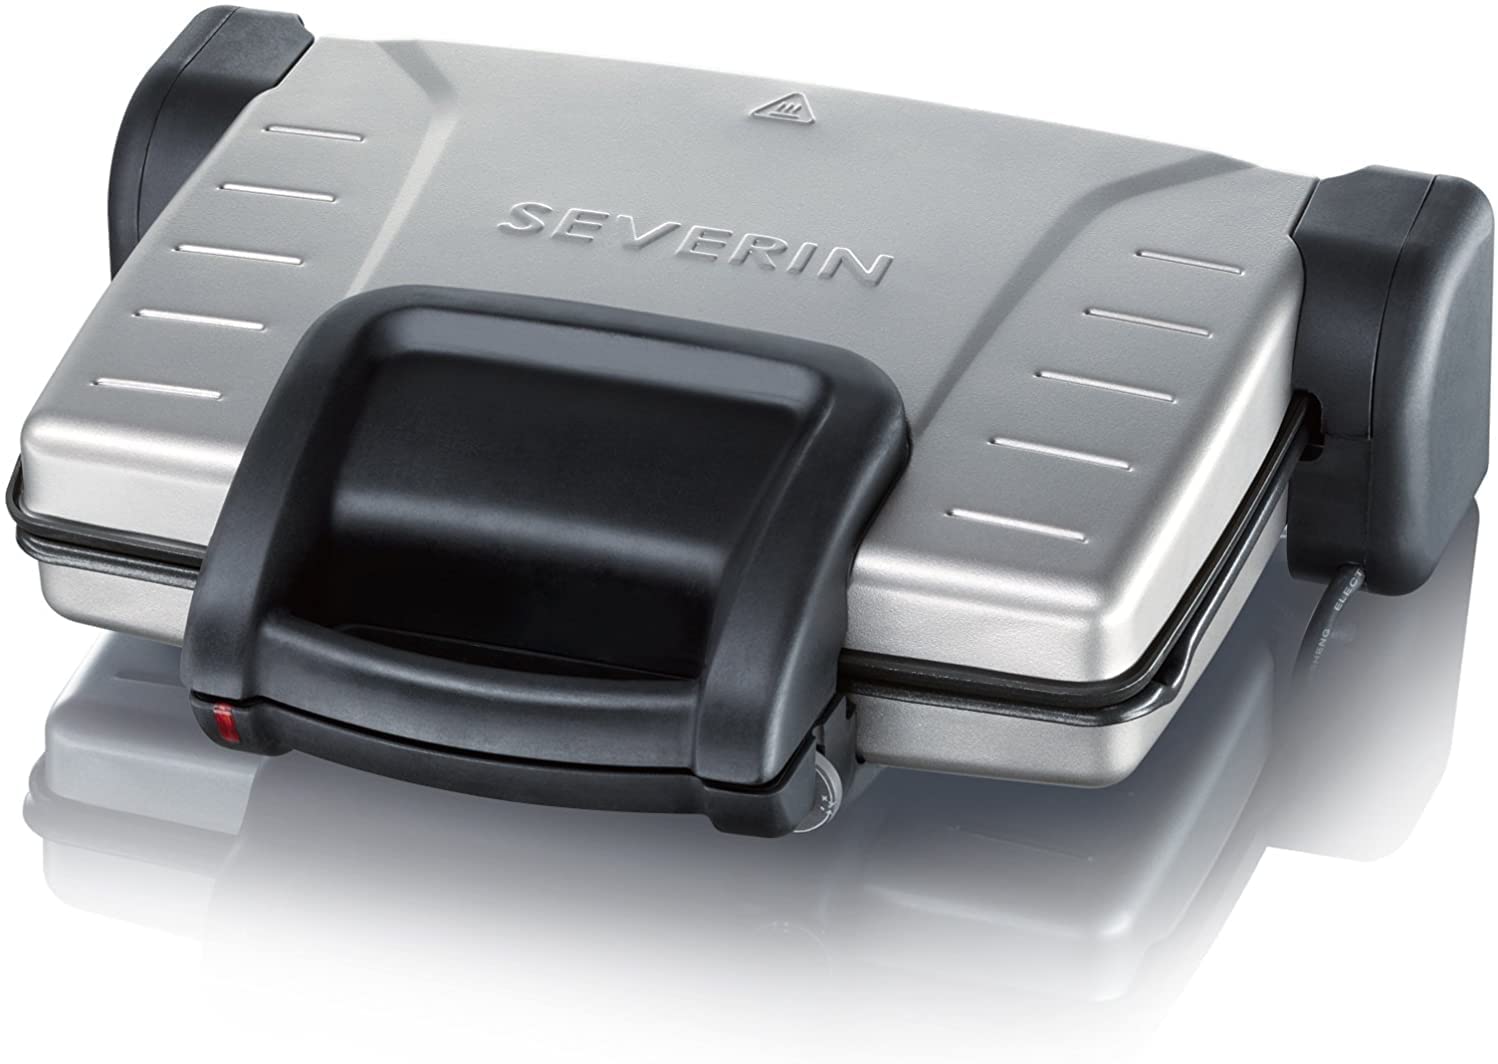 SEVERIN KG 2389 Contact Grill (1800 W, for Grilling and Toasting) Silver / Black